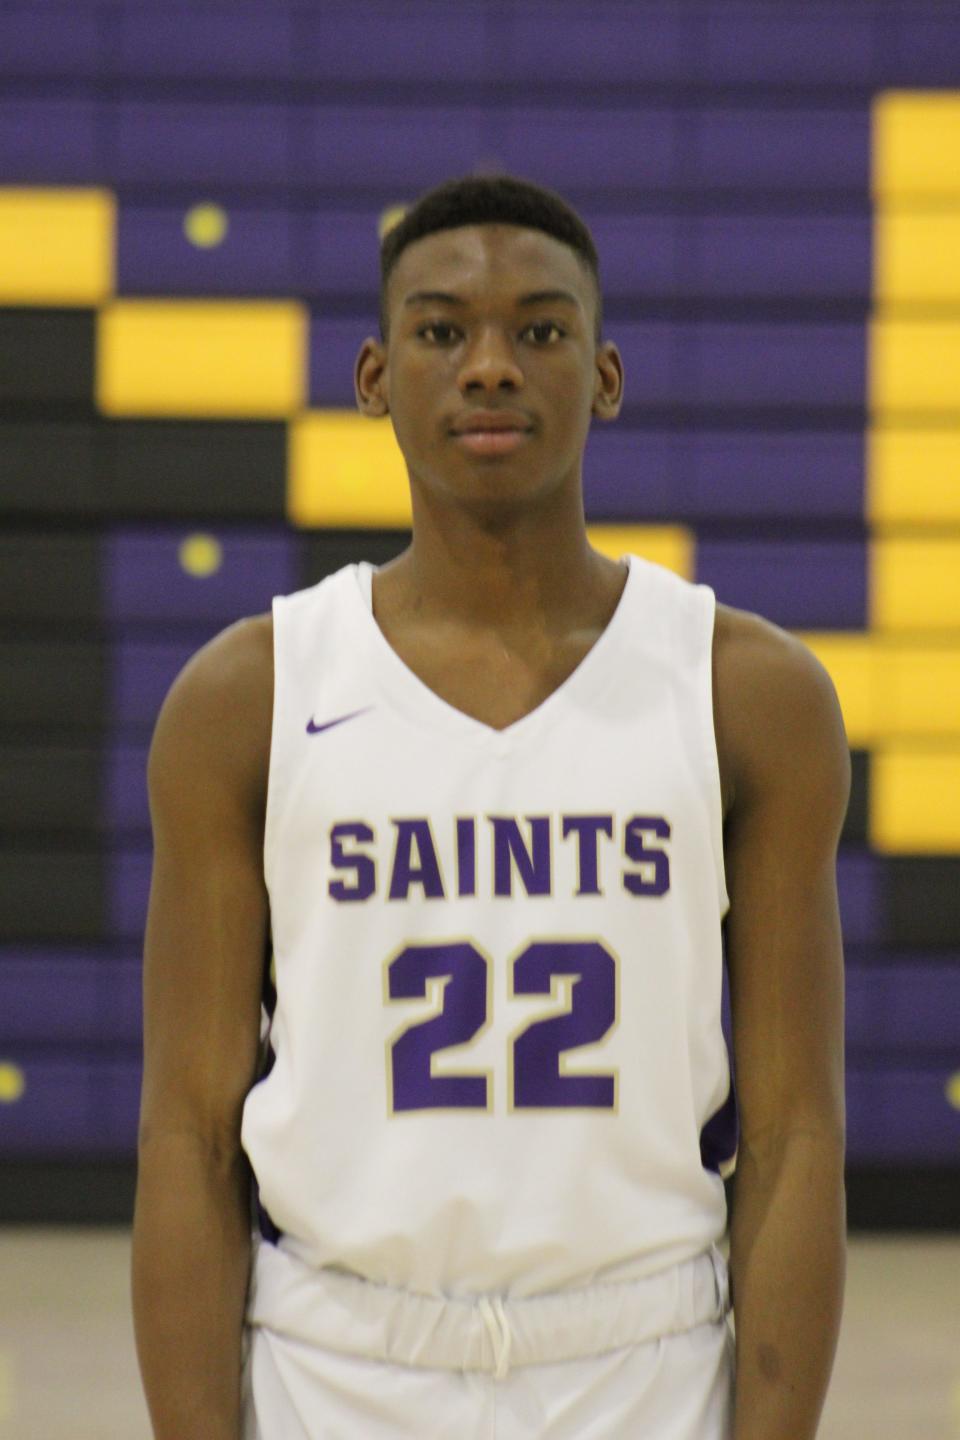 Anthony Batson scored 47 points in Notre Dame Prep's 2OT win over Cactus.